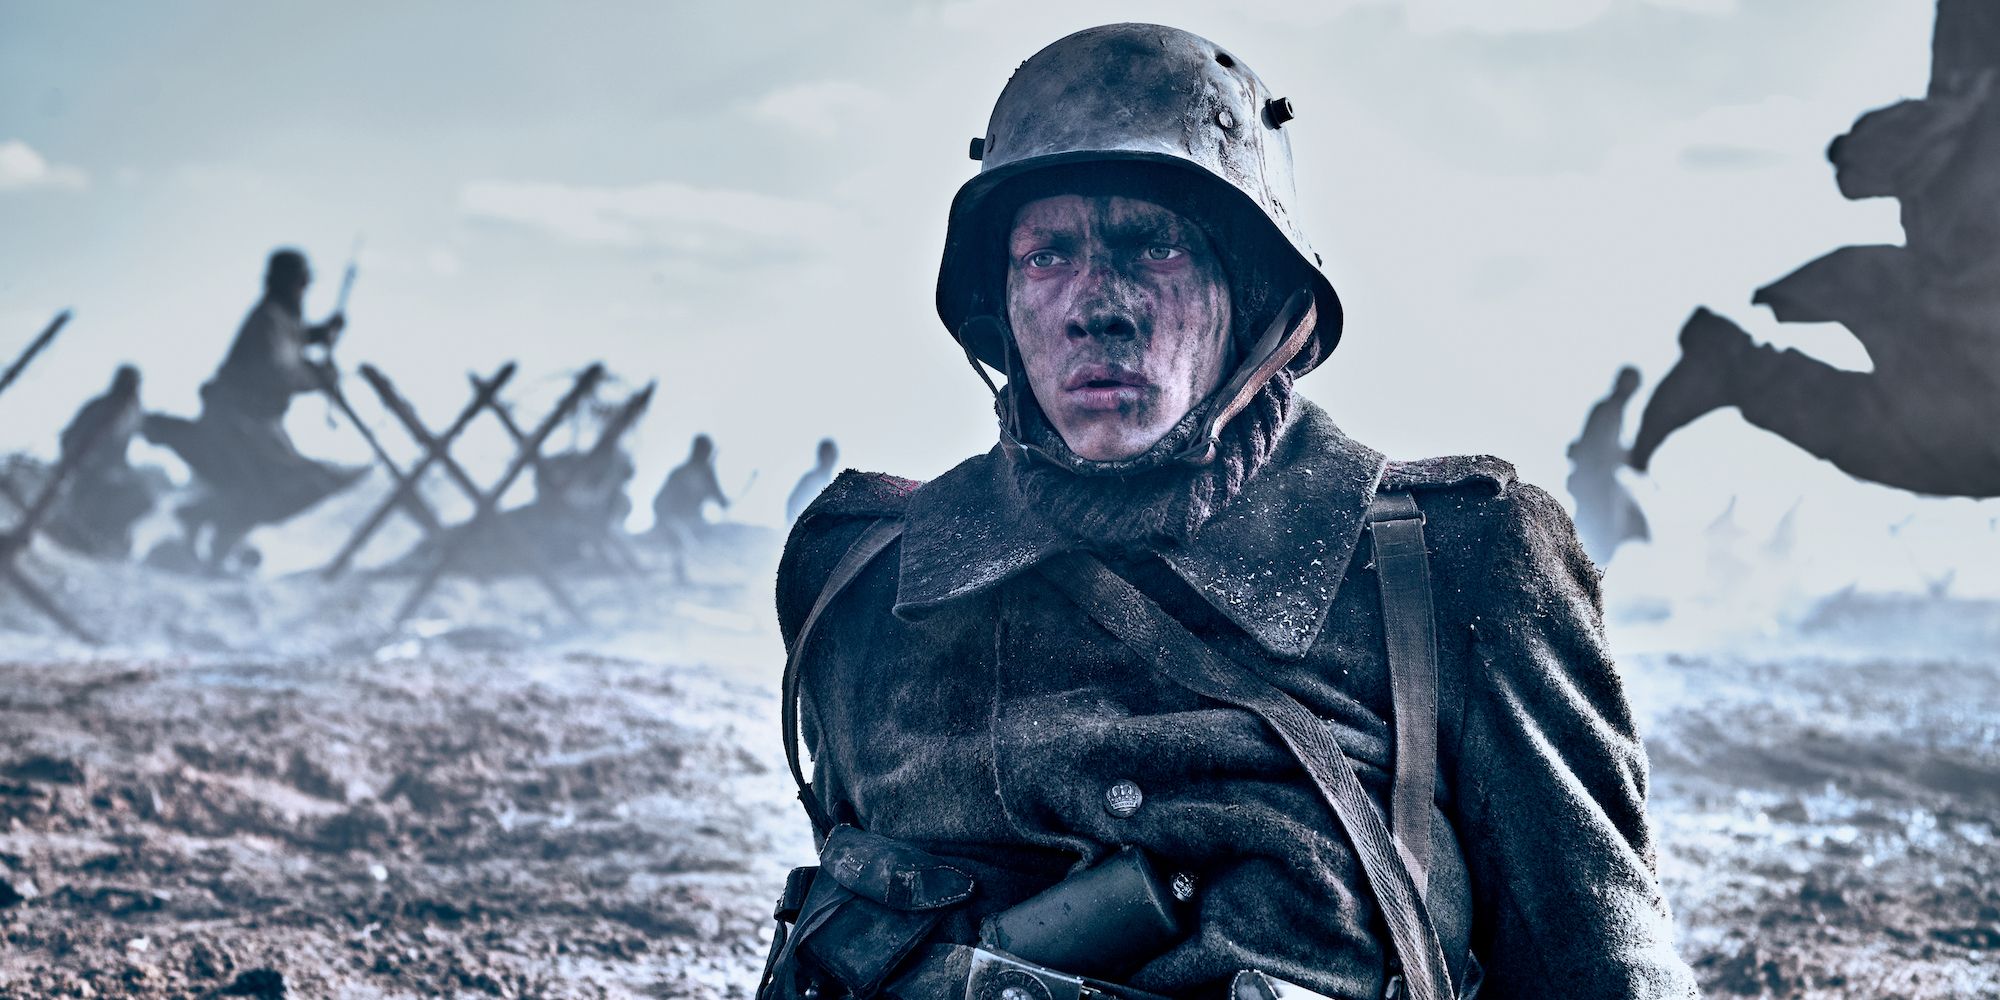 All Quiet On The Western Front Review: Youth & War Meet In Searing WWI Drama